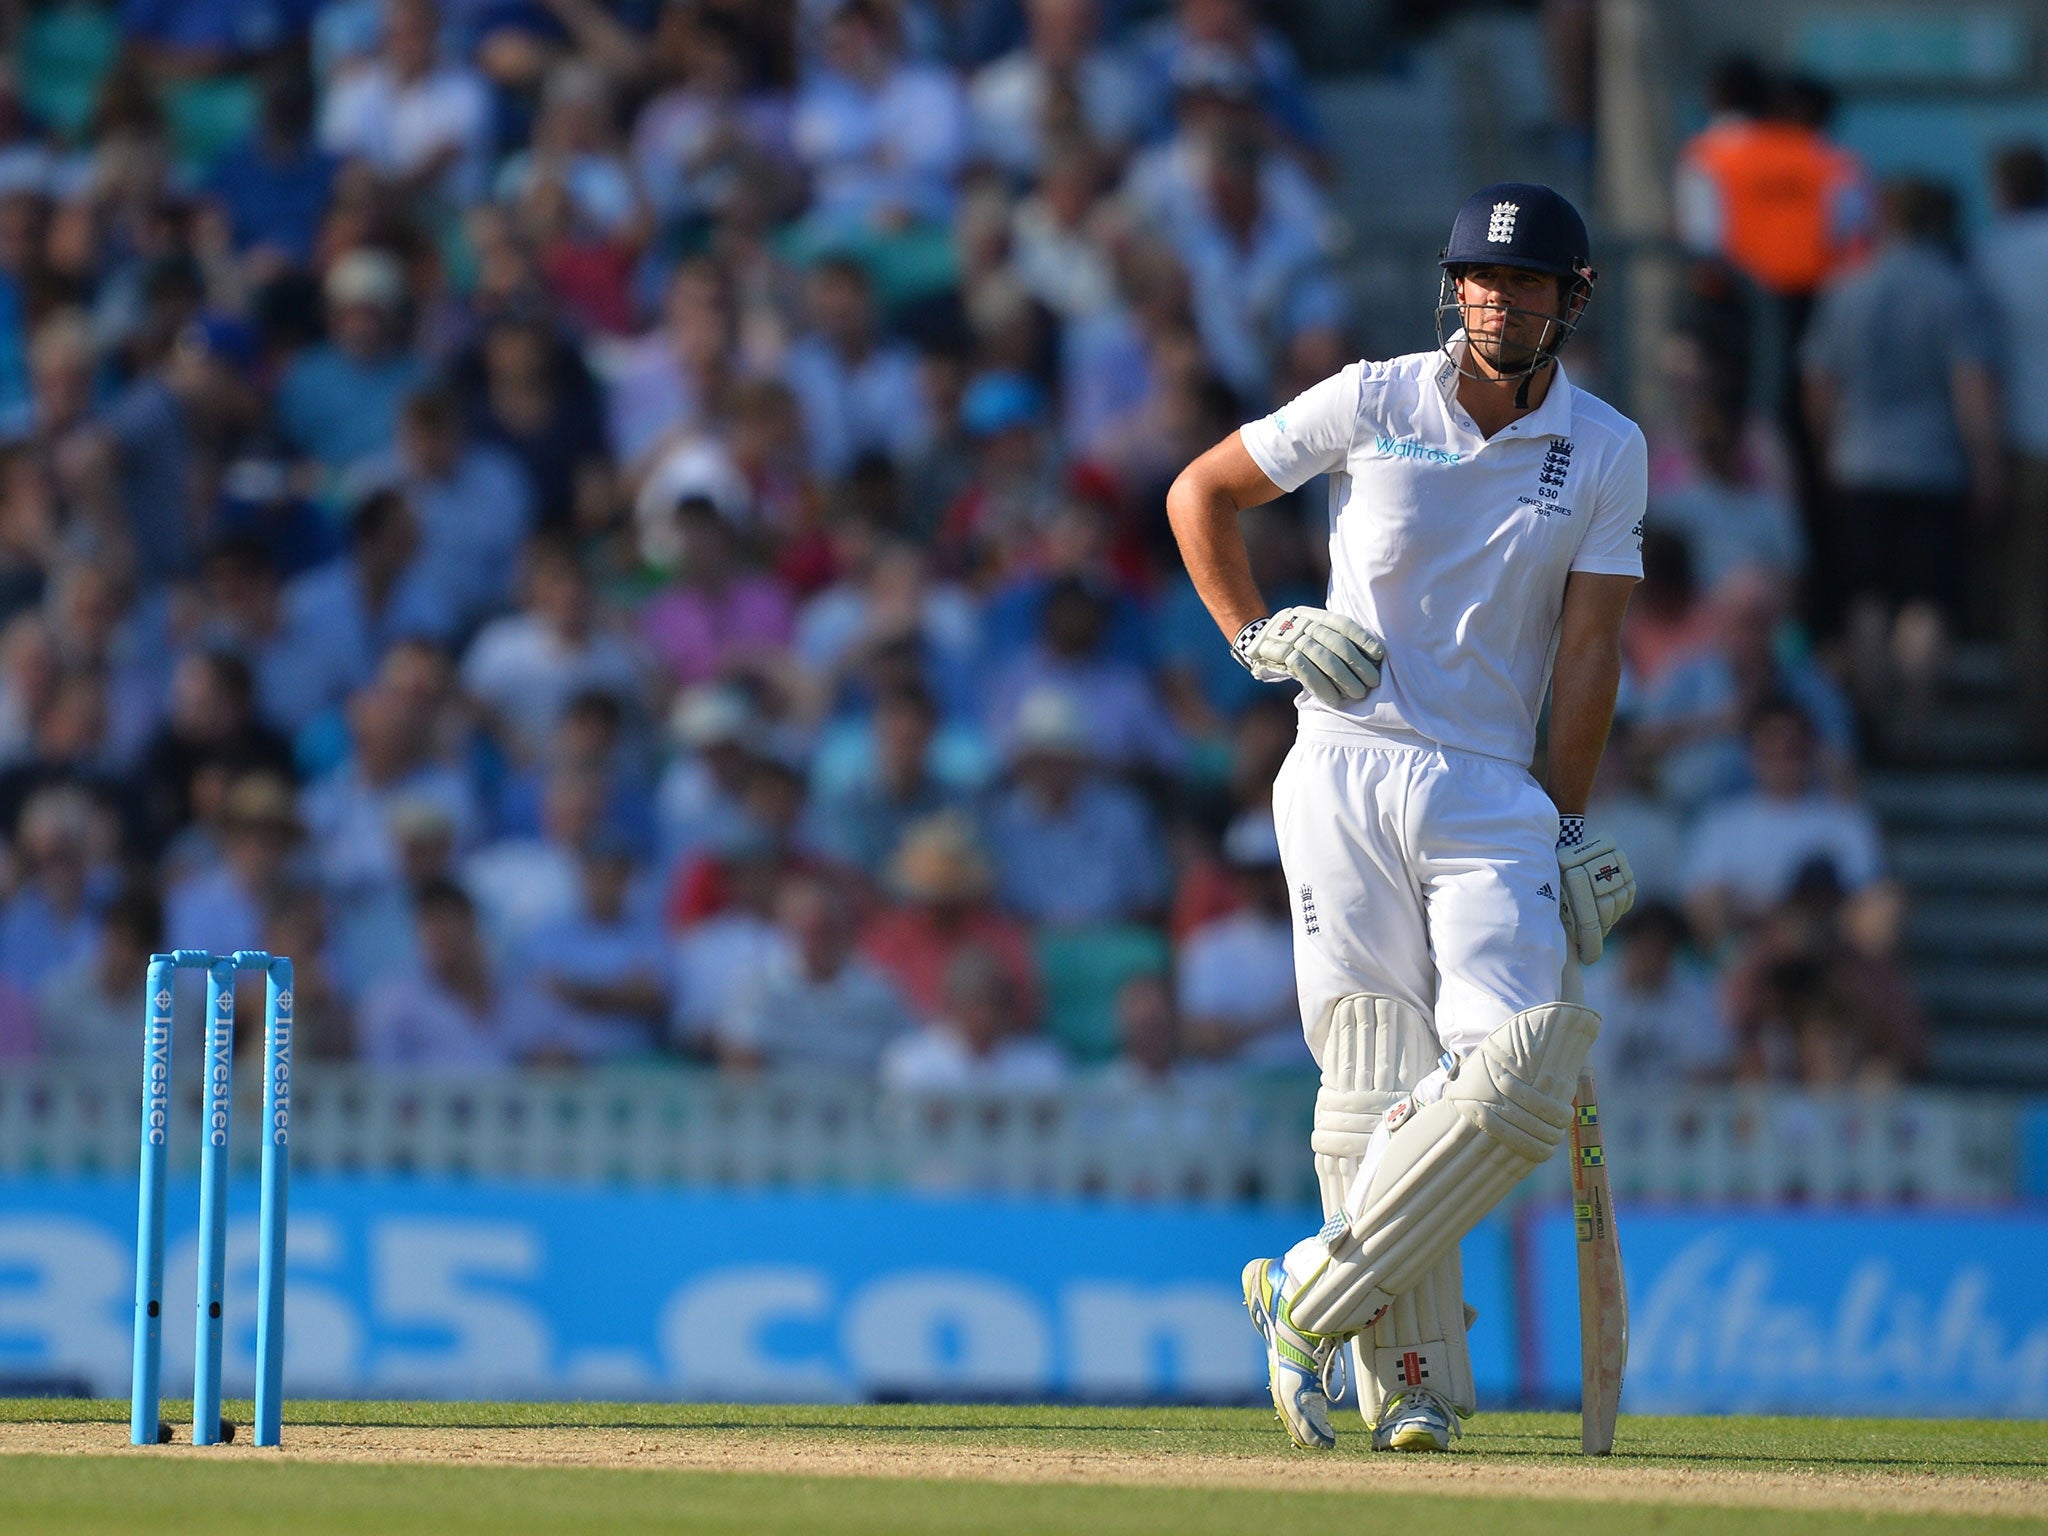 England captain Alastair Cook saw five batting partners come and go on day three